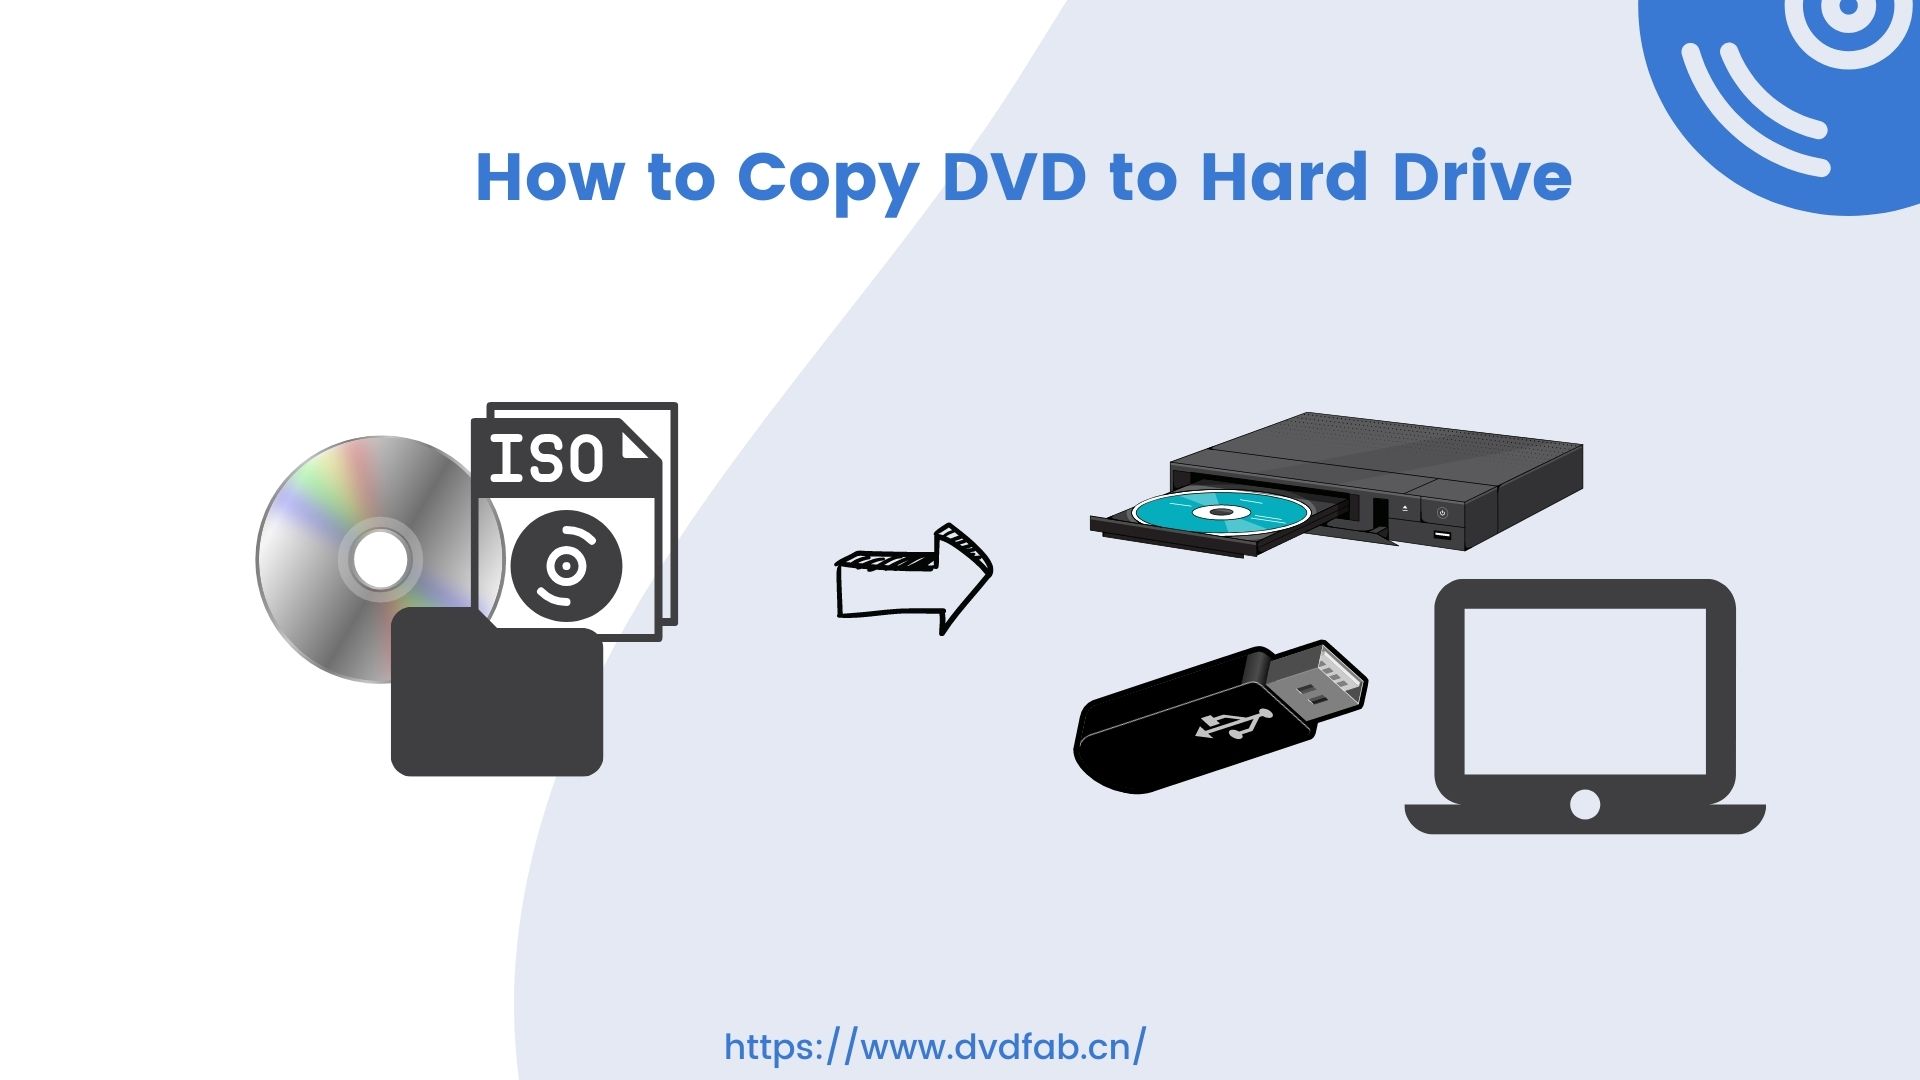 Specialisere Asien spyd Copy DVD to Computer and Hard Drive Free and Fast with Simple Steps